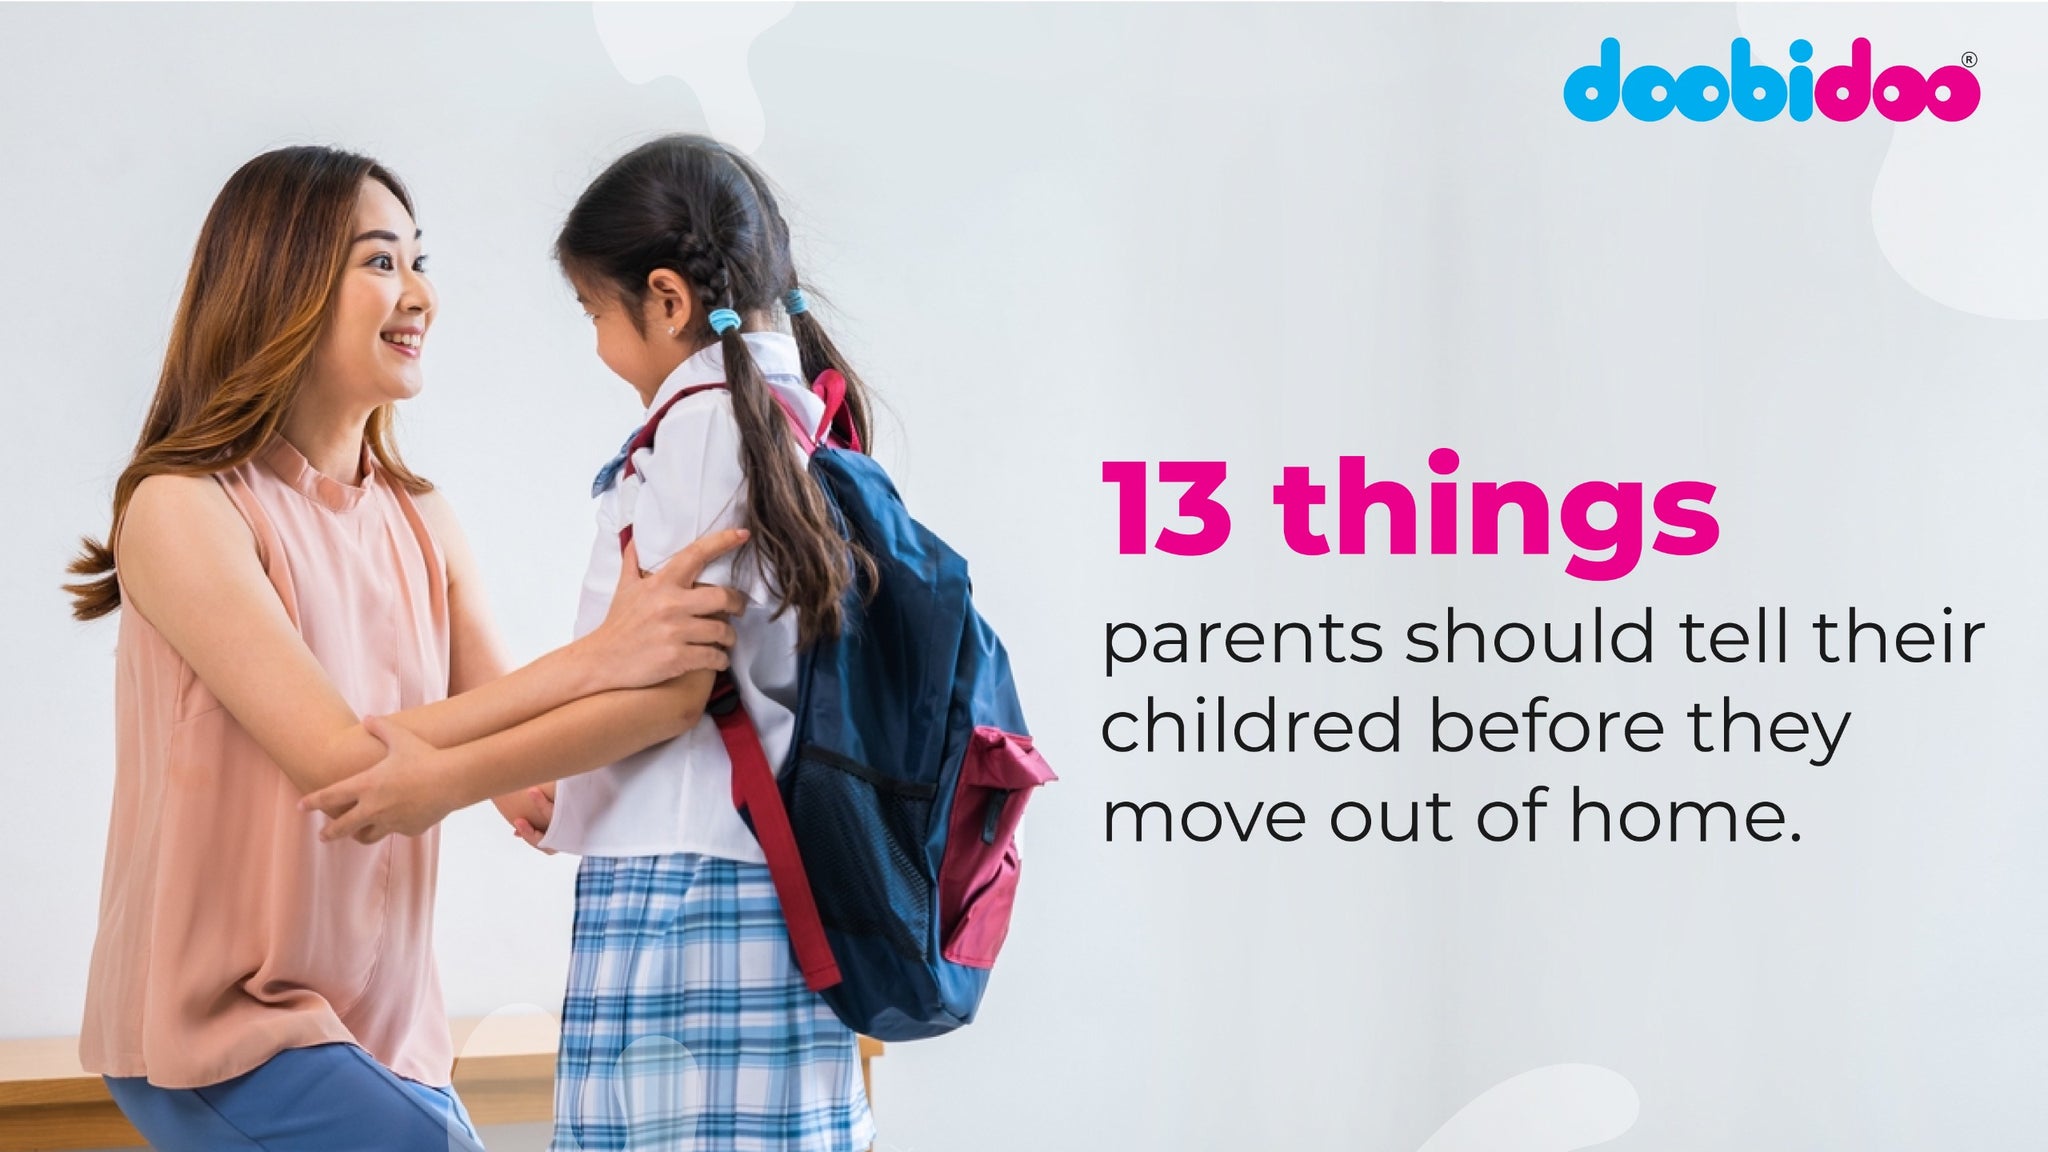 13 life skills parents should teach their kids before leaving home